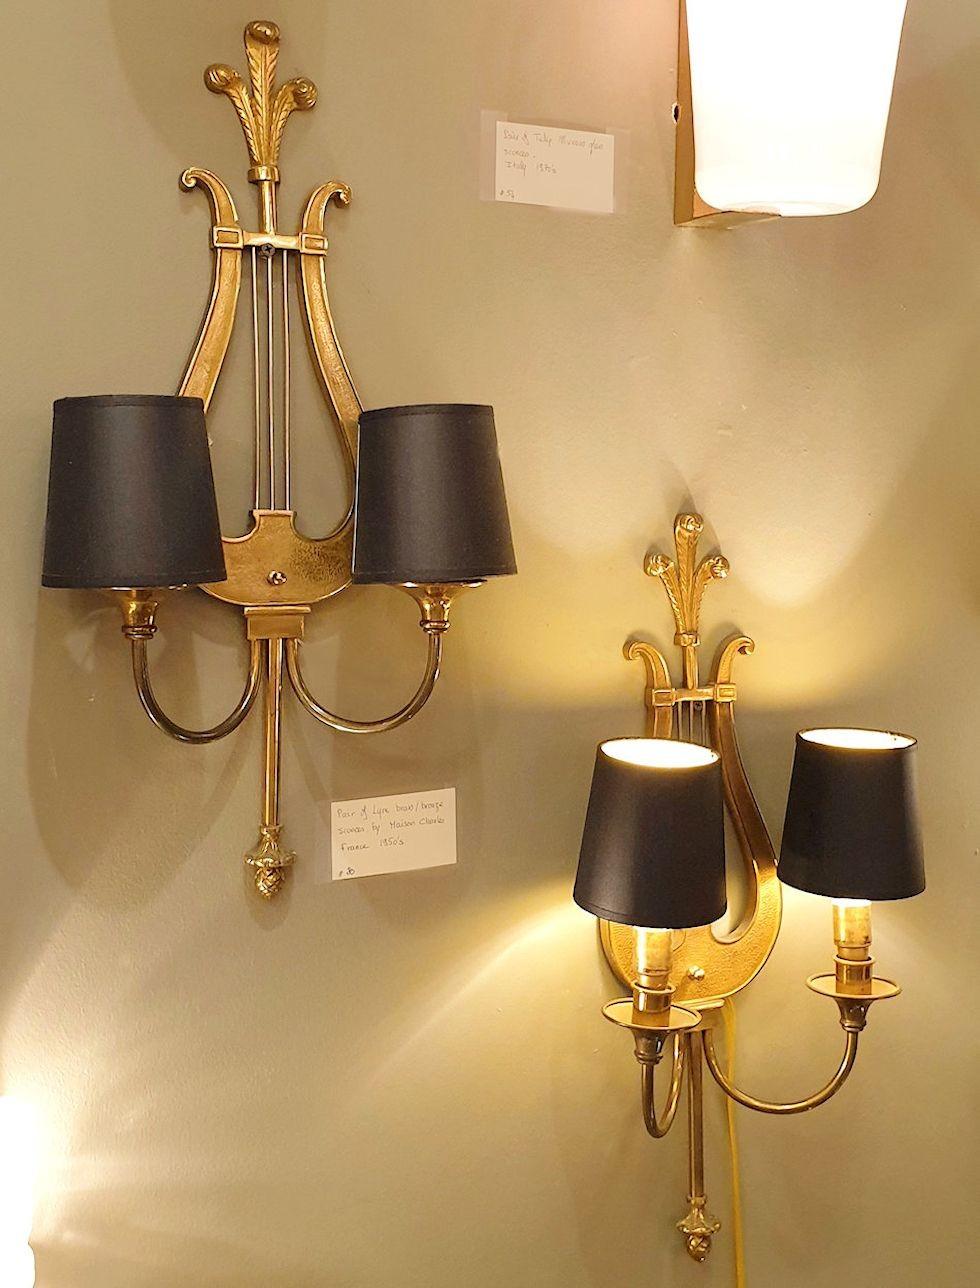 Pair of Lyre neoclassical style sconces, by Maison Charles, France 1950s.
The pair of sconces are made of bronze, and have 2 lights each.
Each light bulb is covered with a small black shade. The shades can be removed.
They are rewired for the